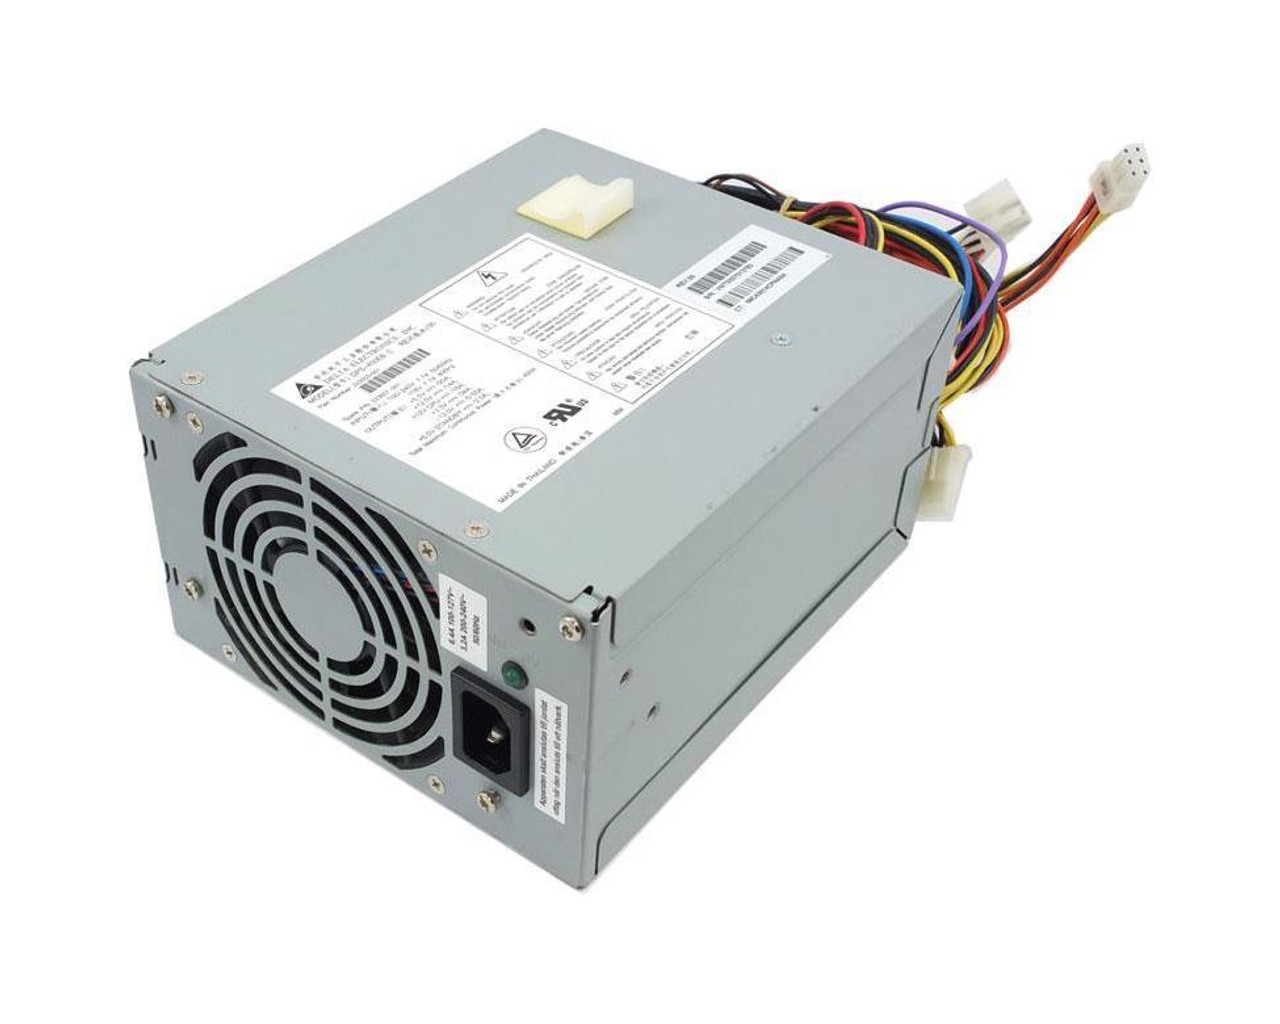 DPS-450EB-C HP 450-Watts 100-240V AC Redundant Hot Swap Power Supply with Active PFC for XW8000 WorkStation